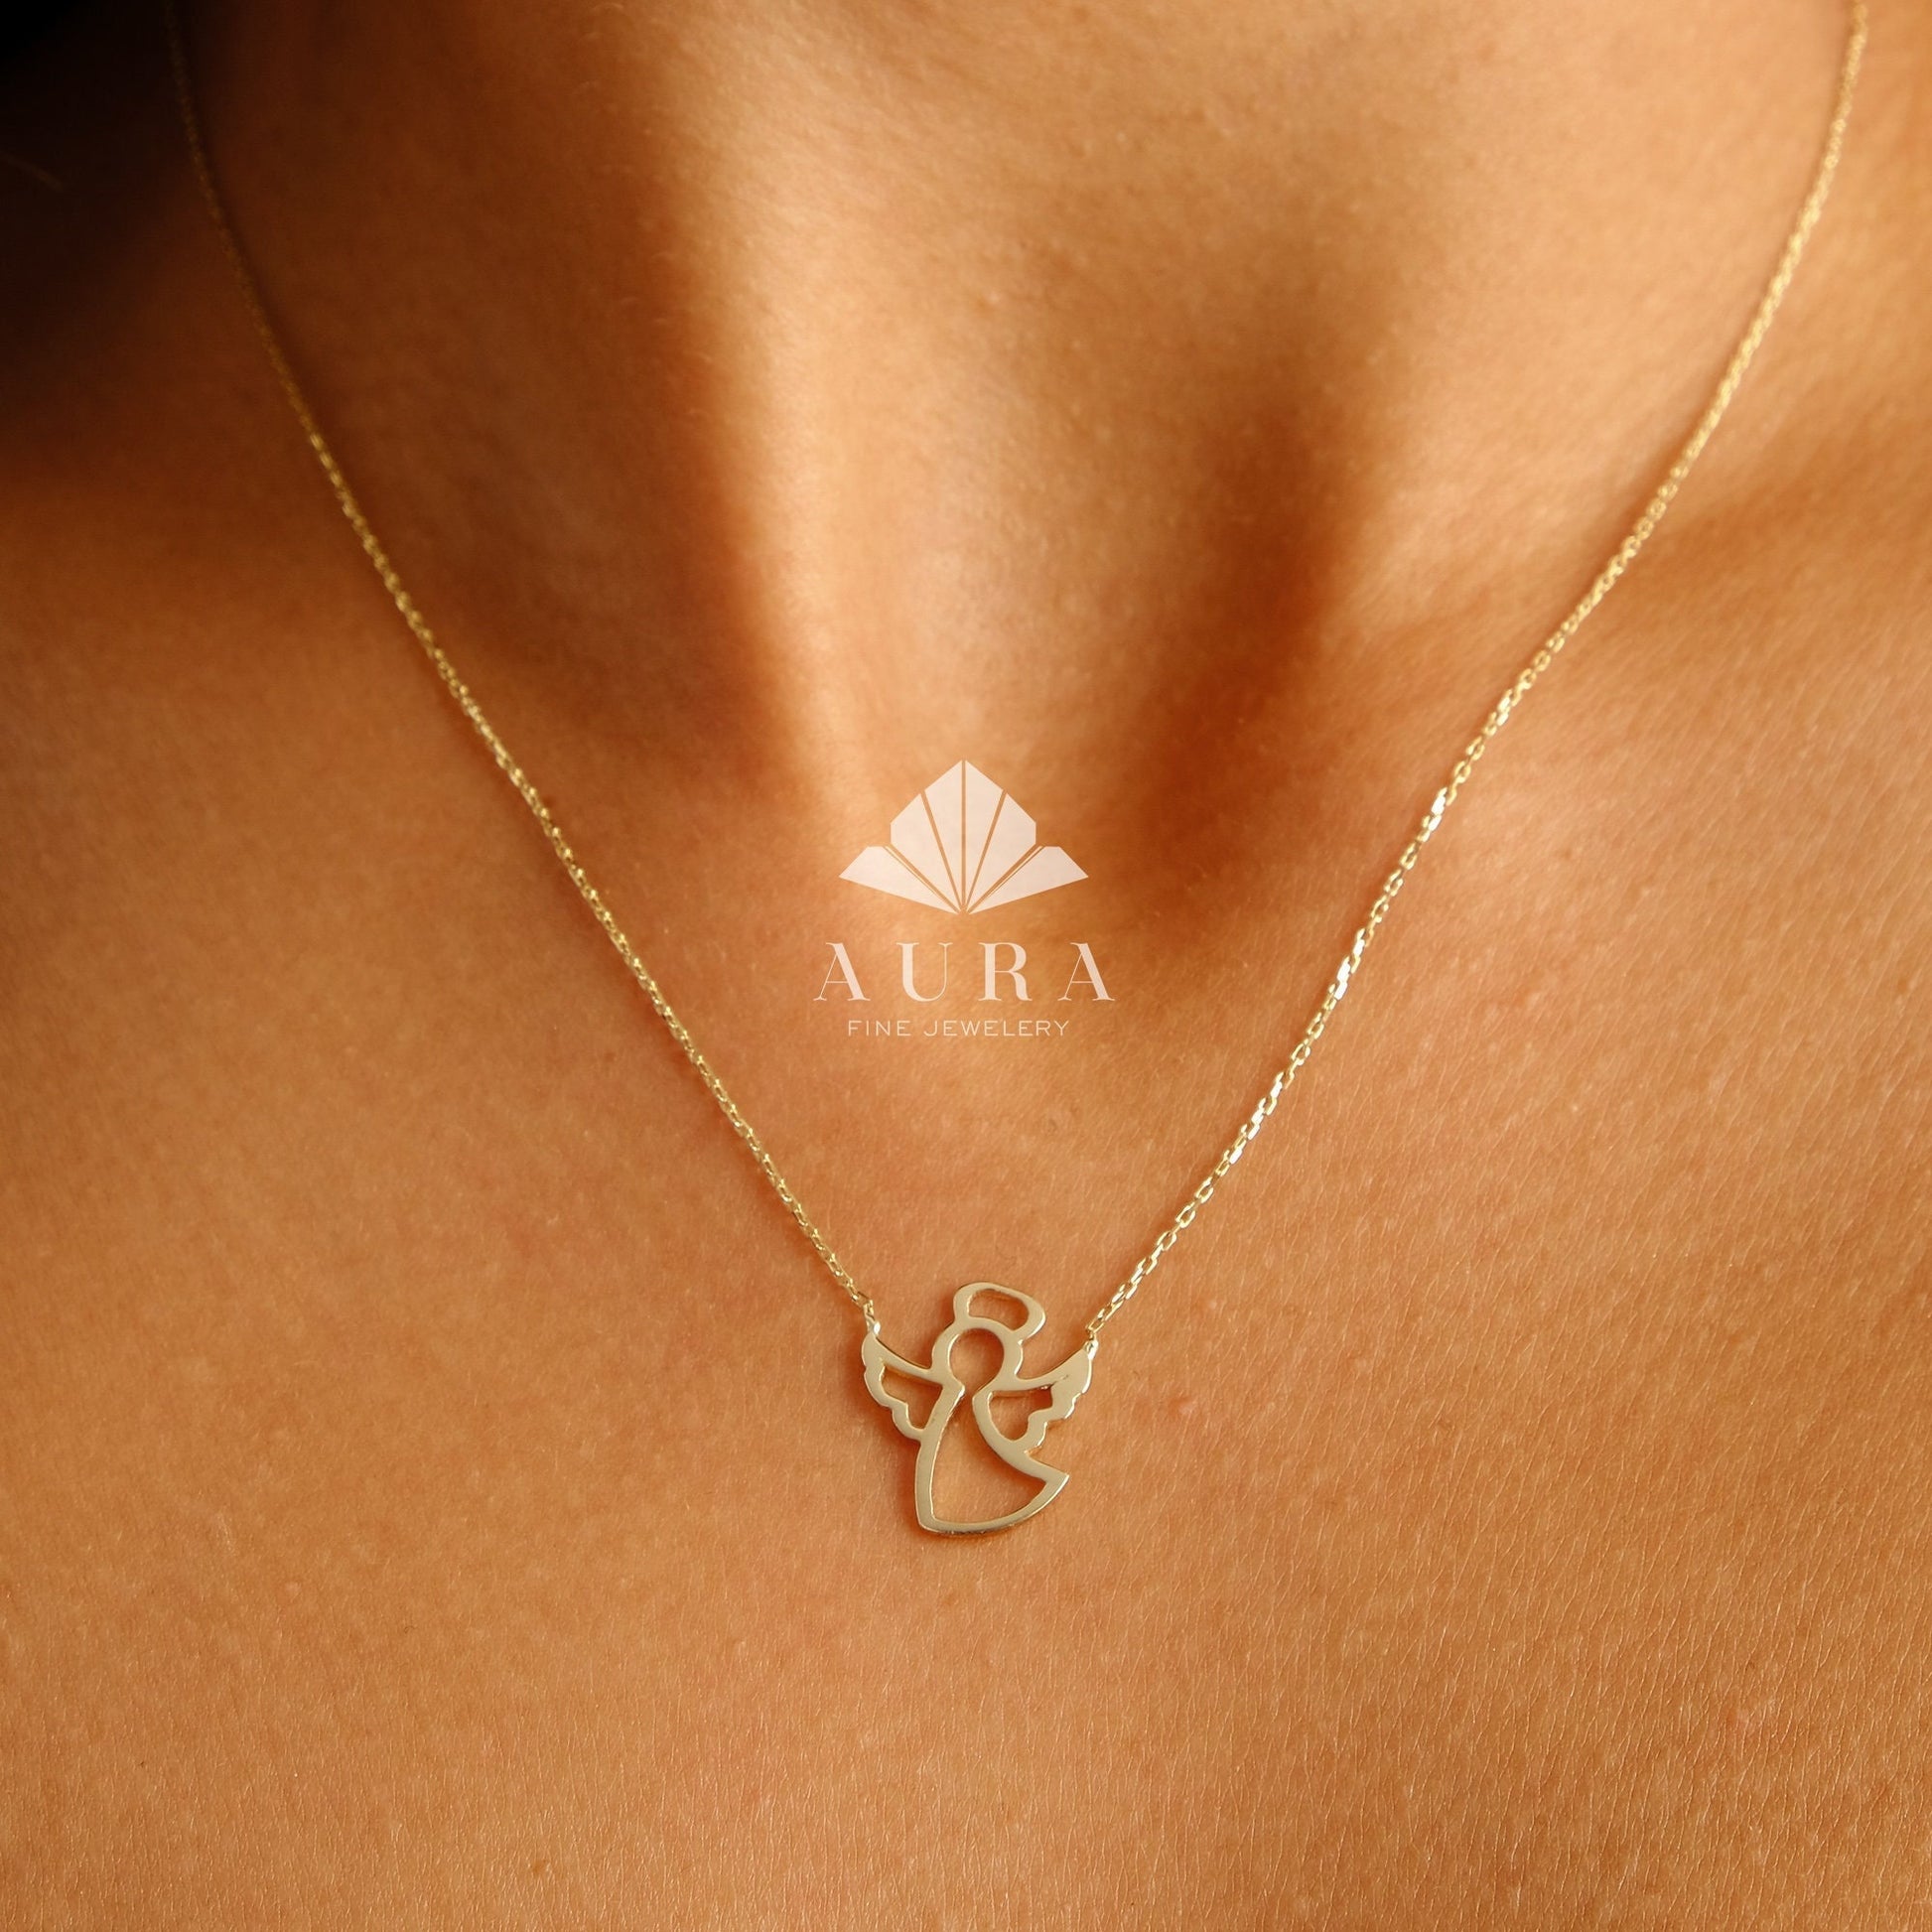 14K Gold Guardian Angel Necklace, Angel Pendant, Dainty Angel Necklace, Protection Jewelry, Angel Good Luck Charm Necklace, Christmas Gift